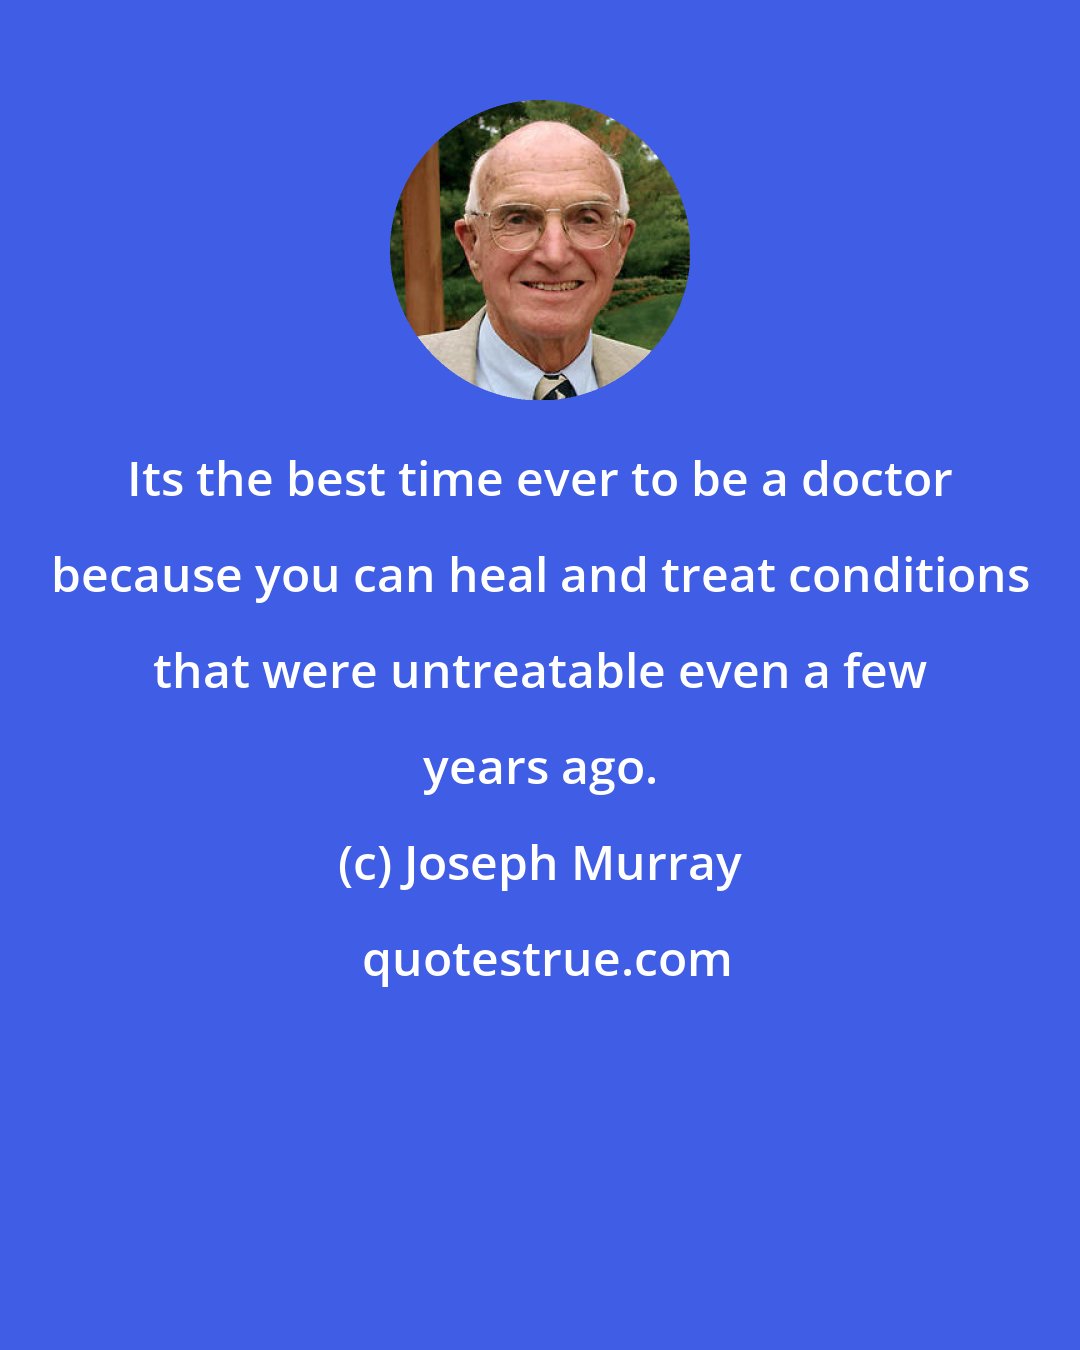 Joseph Murray: Its the best time ever to be a doctor because you can heal and treat conditions that were untreatable even a few years ago.